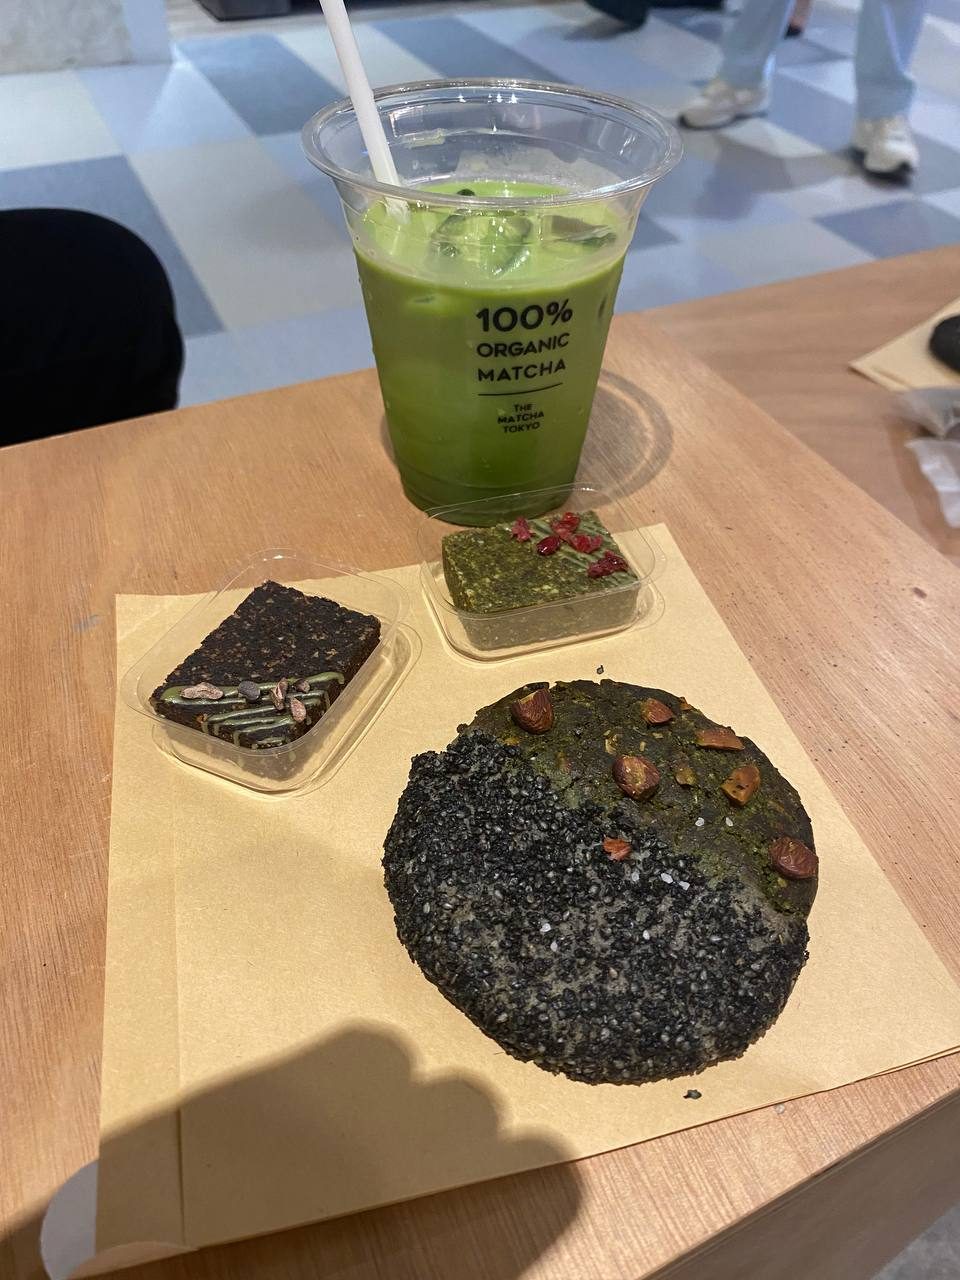 THE MATCHA TOKYO Cafe - Sweets and Drinks Using Organic Green Tea